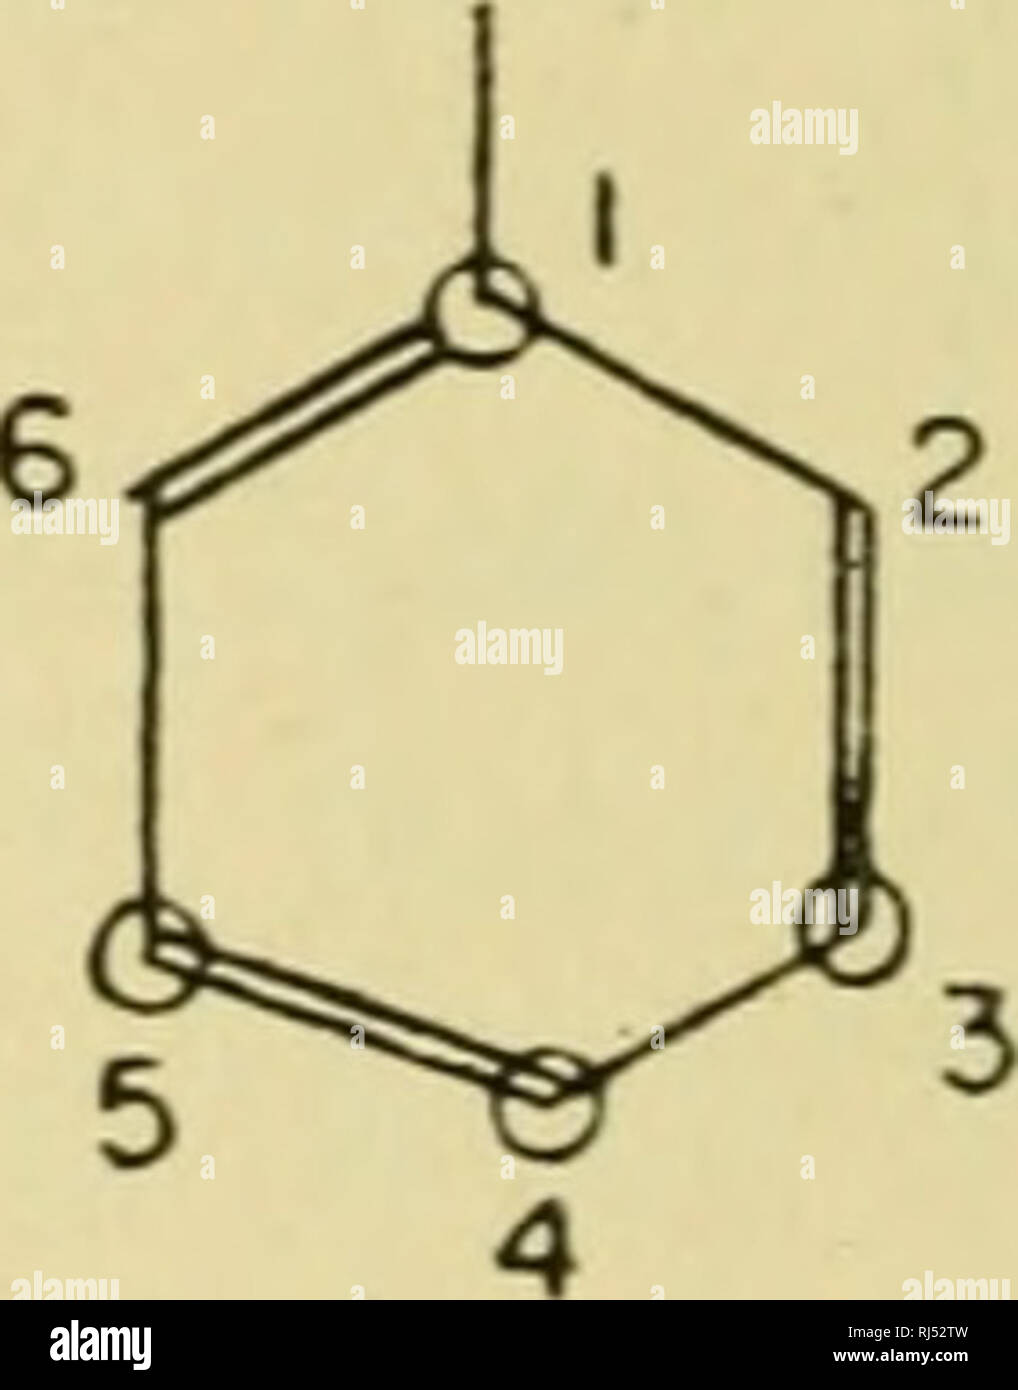 Solved Highligte each of the positions on the benzene ring | Chegg.com